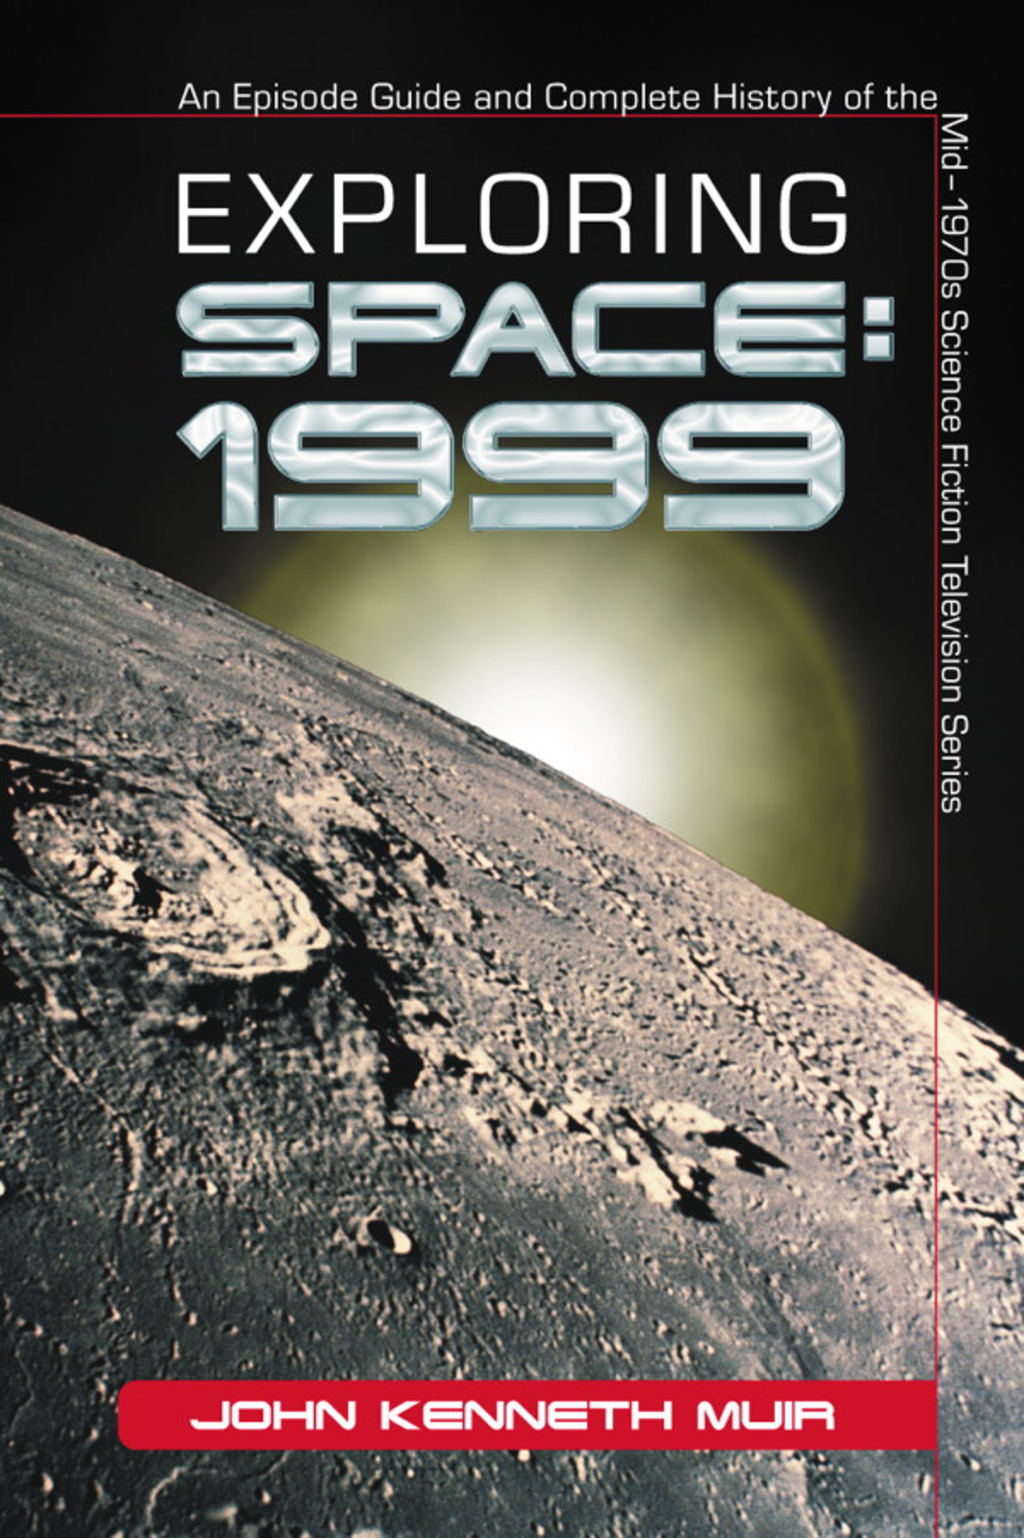 Exploring Space: 1999: An Episode Guide and Complete History of the Mid-1970s Science Fiction Television Series (eBook) - John Kenneth Muir,